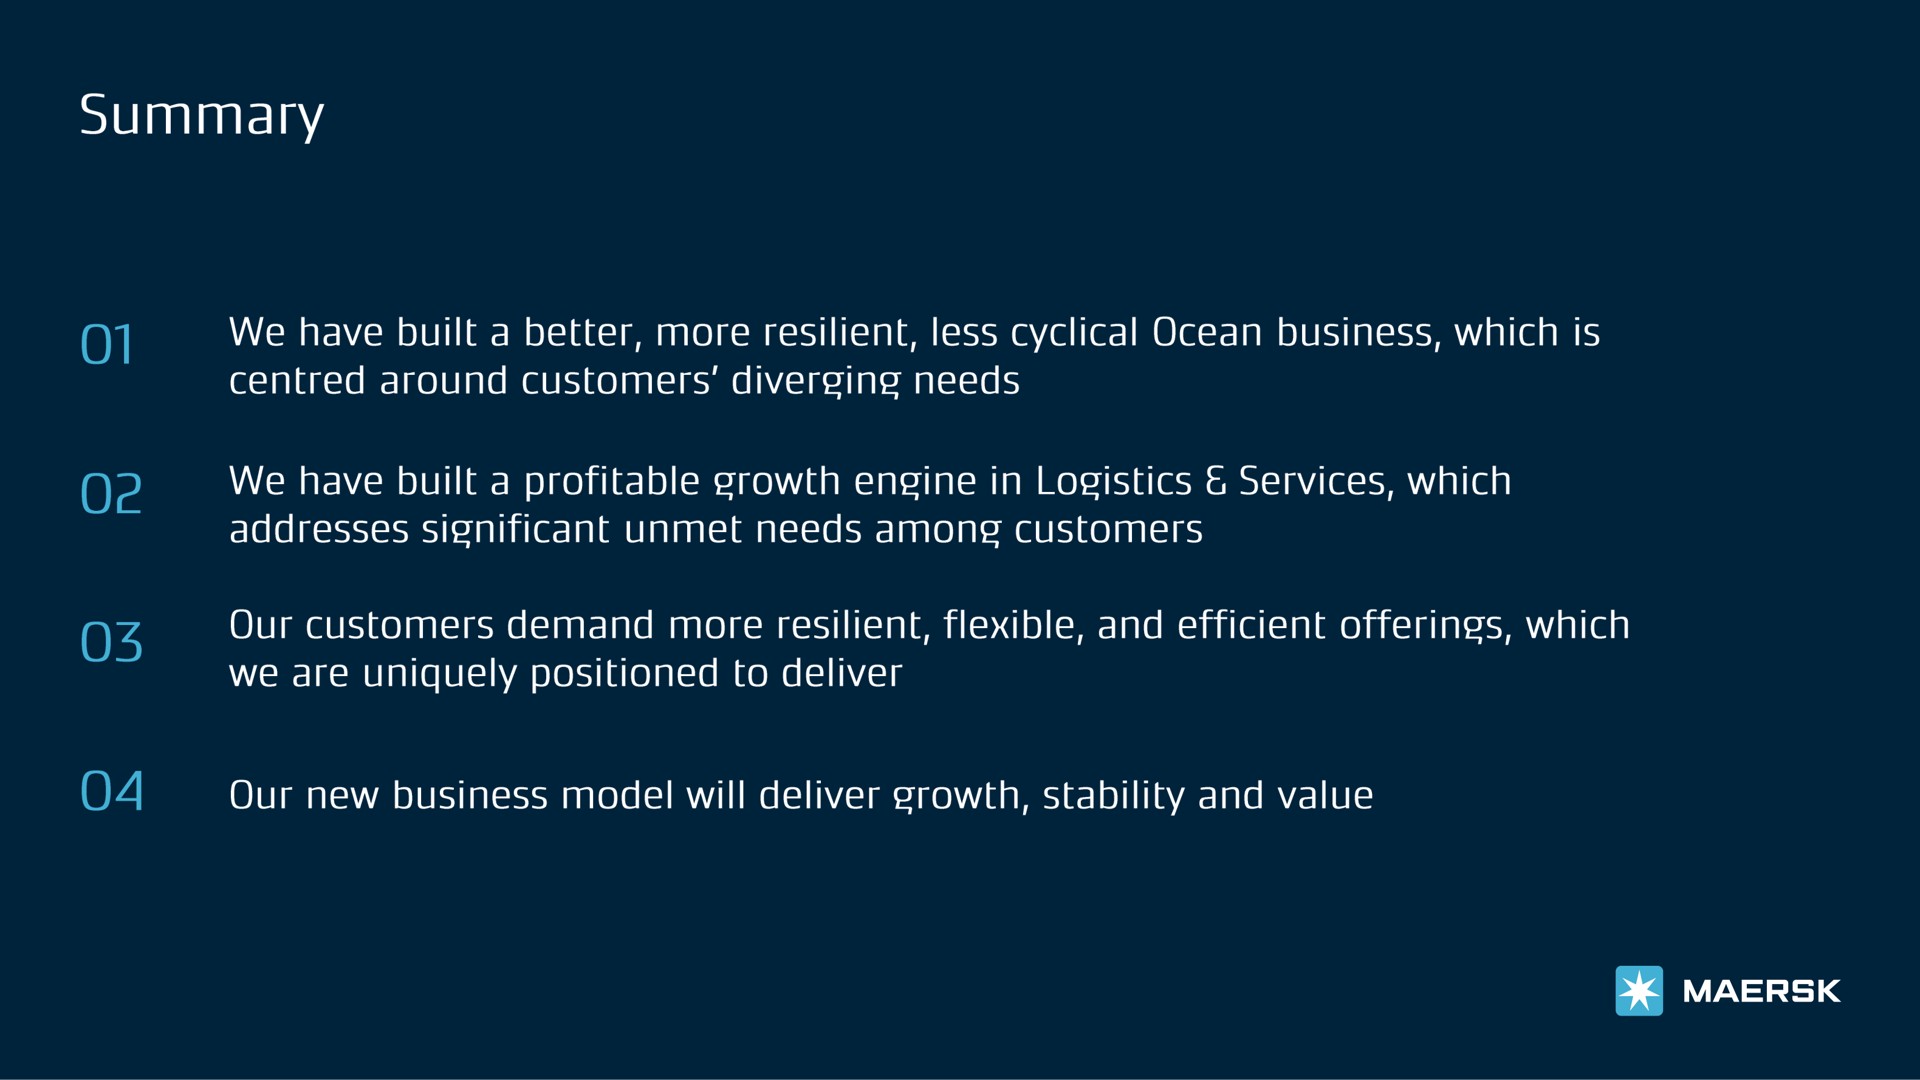 solan of we have built a better more resilient less cyclical ocean business which is around customers diverging needs we have built a profitable growth engine in logistics services which addresses significant unmet needs among customers our customers demand more resilient flexible and efficient offerings which we are uniquely positioned to deliver our new business model will deliver growth stability and value | Maersk